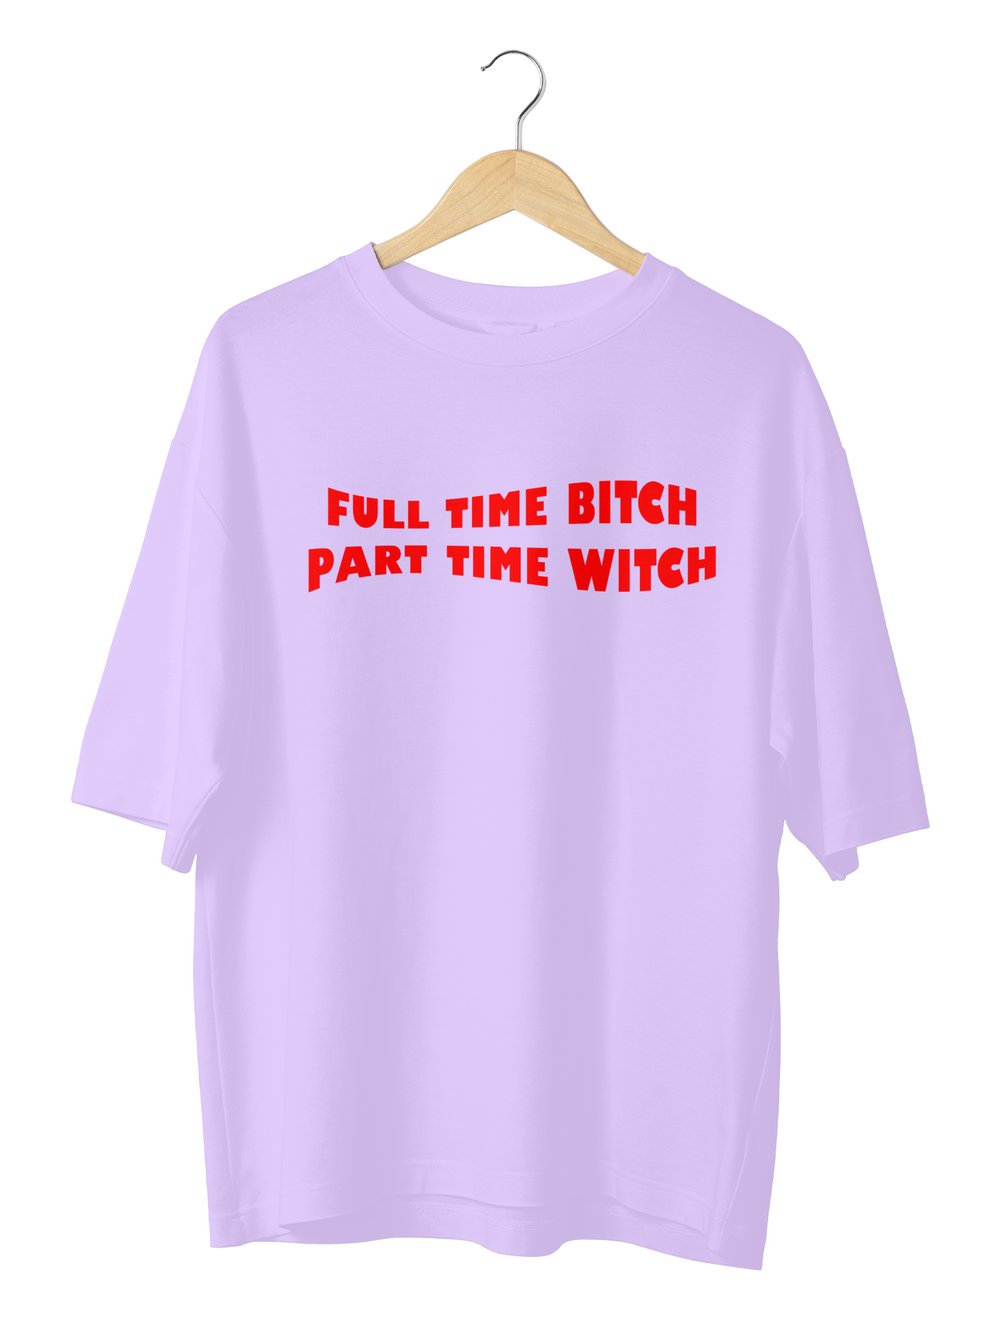 Full Time Bitch Part Time Witch Tshirt